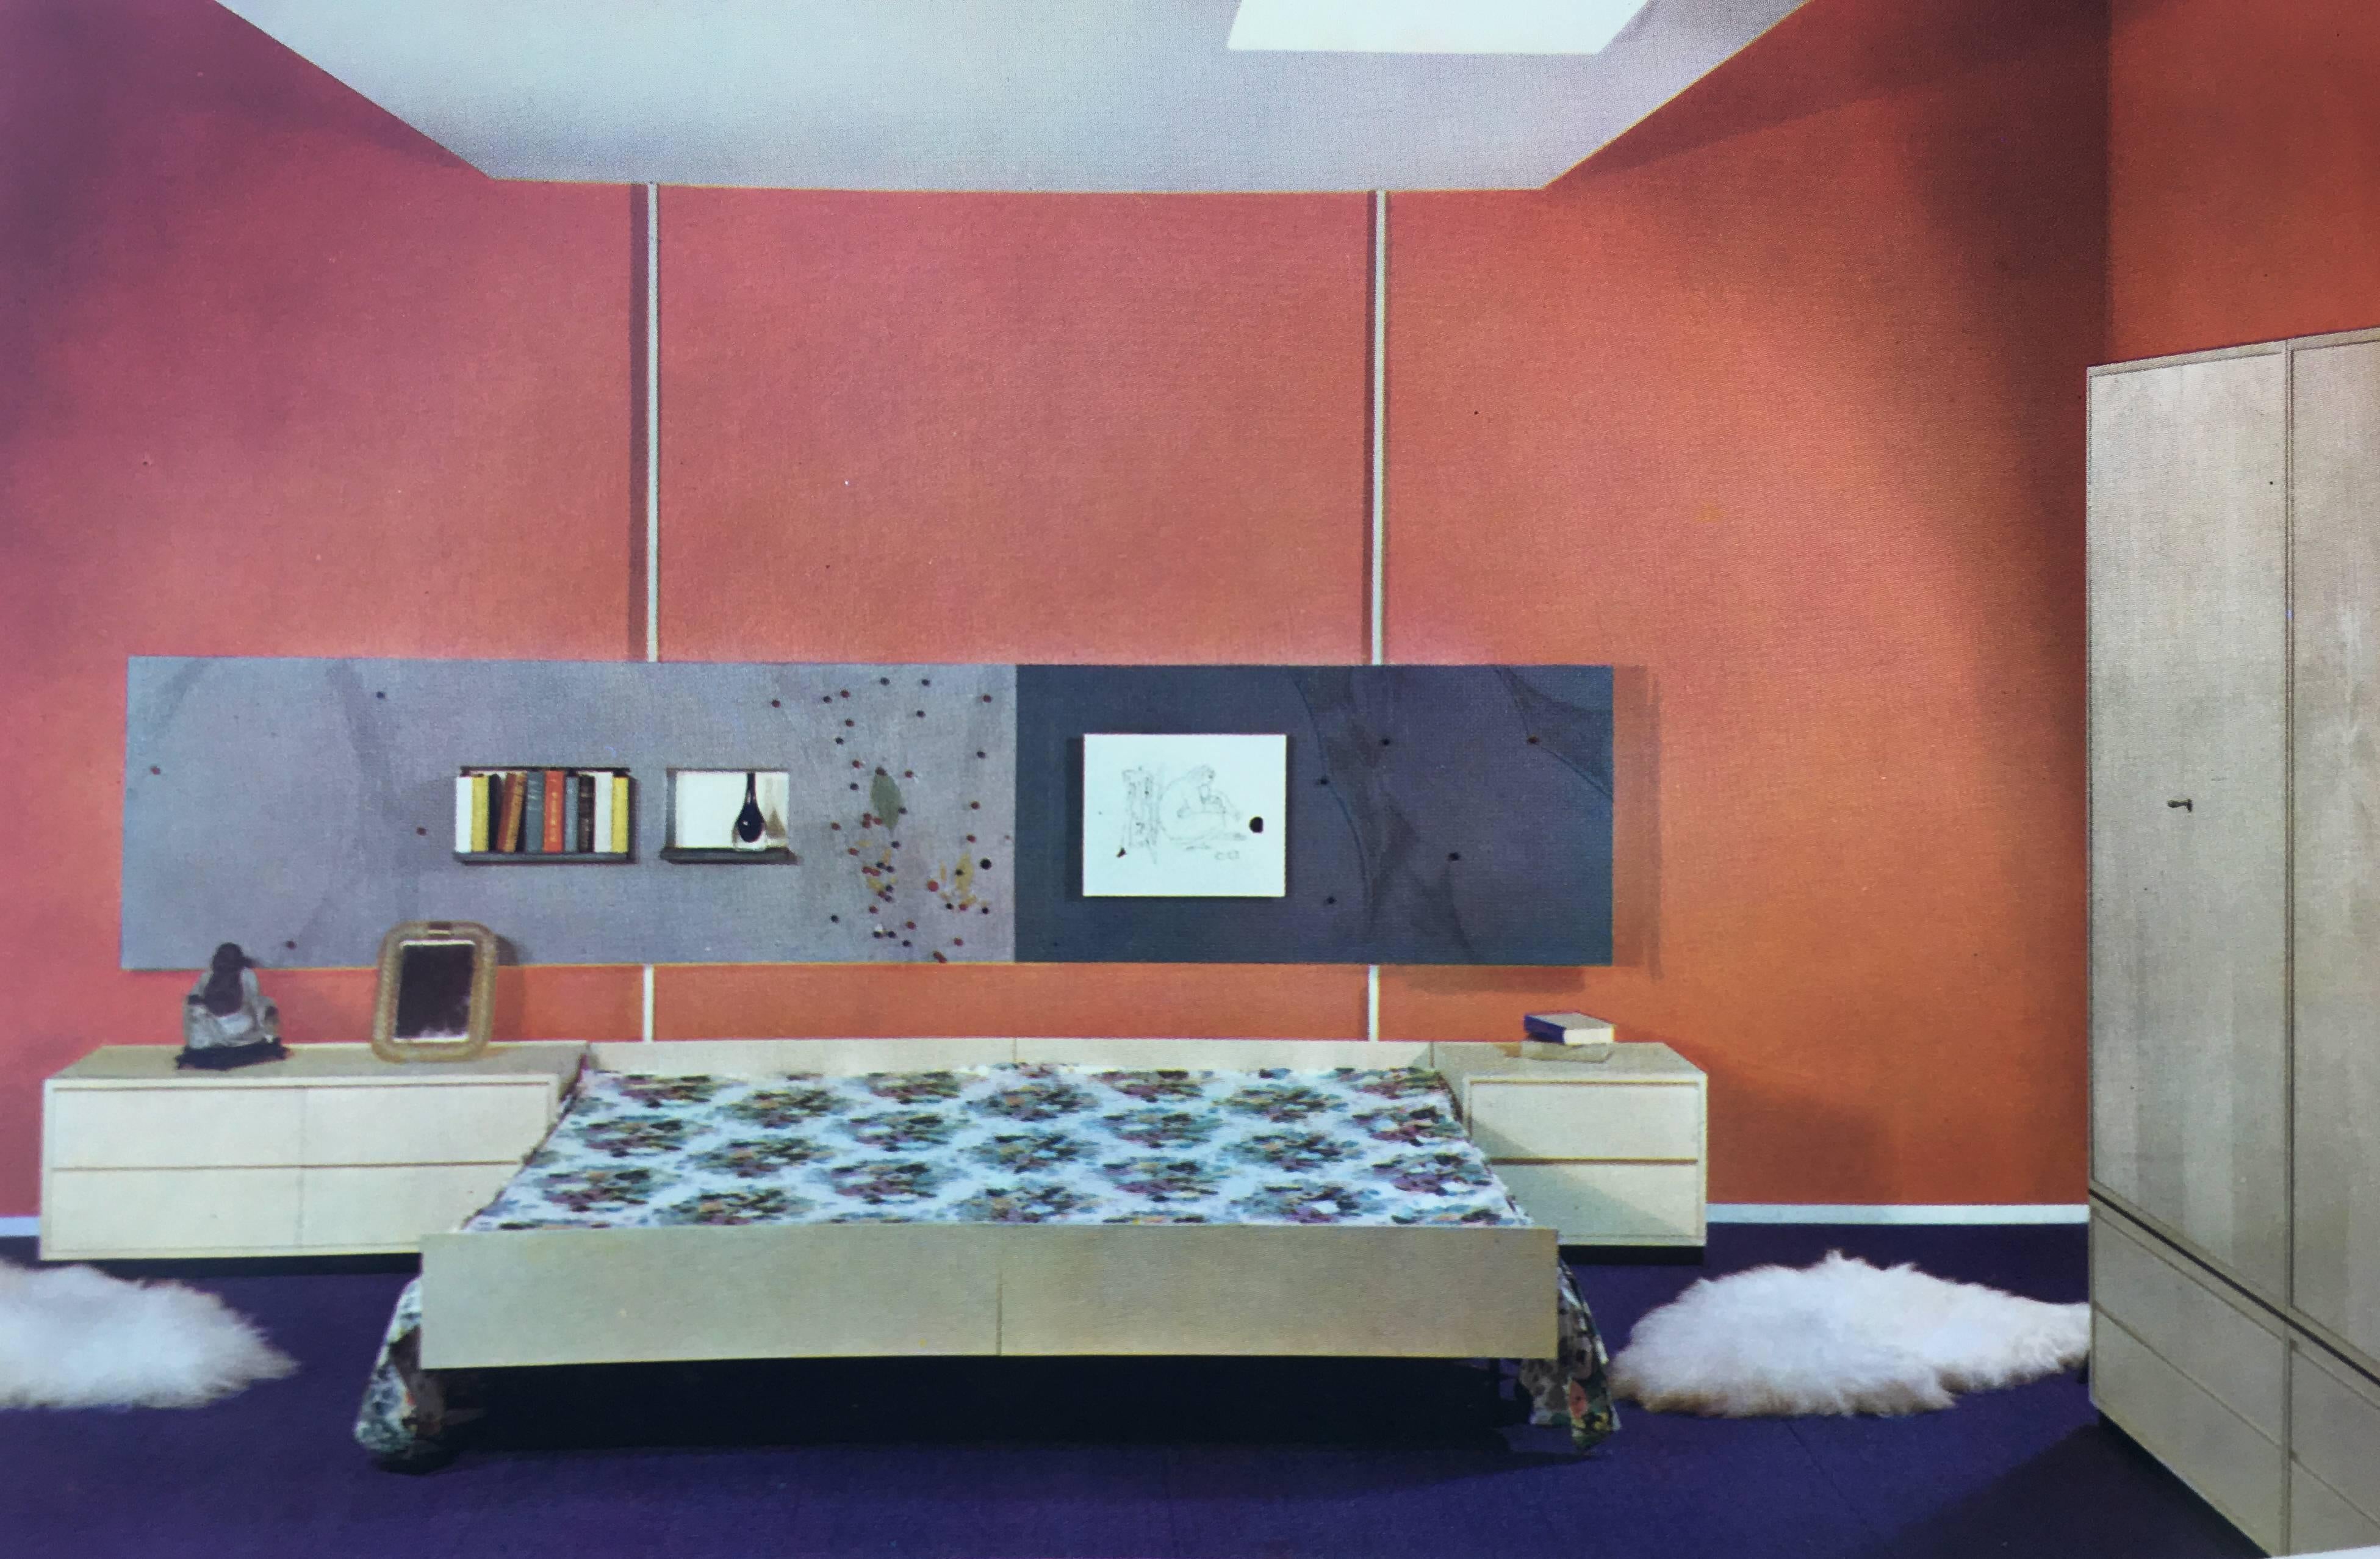 Interiors for Contemporary Living 1st Edition, 1960 3